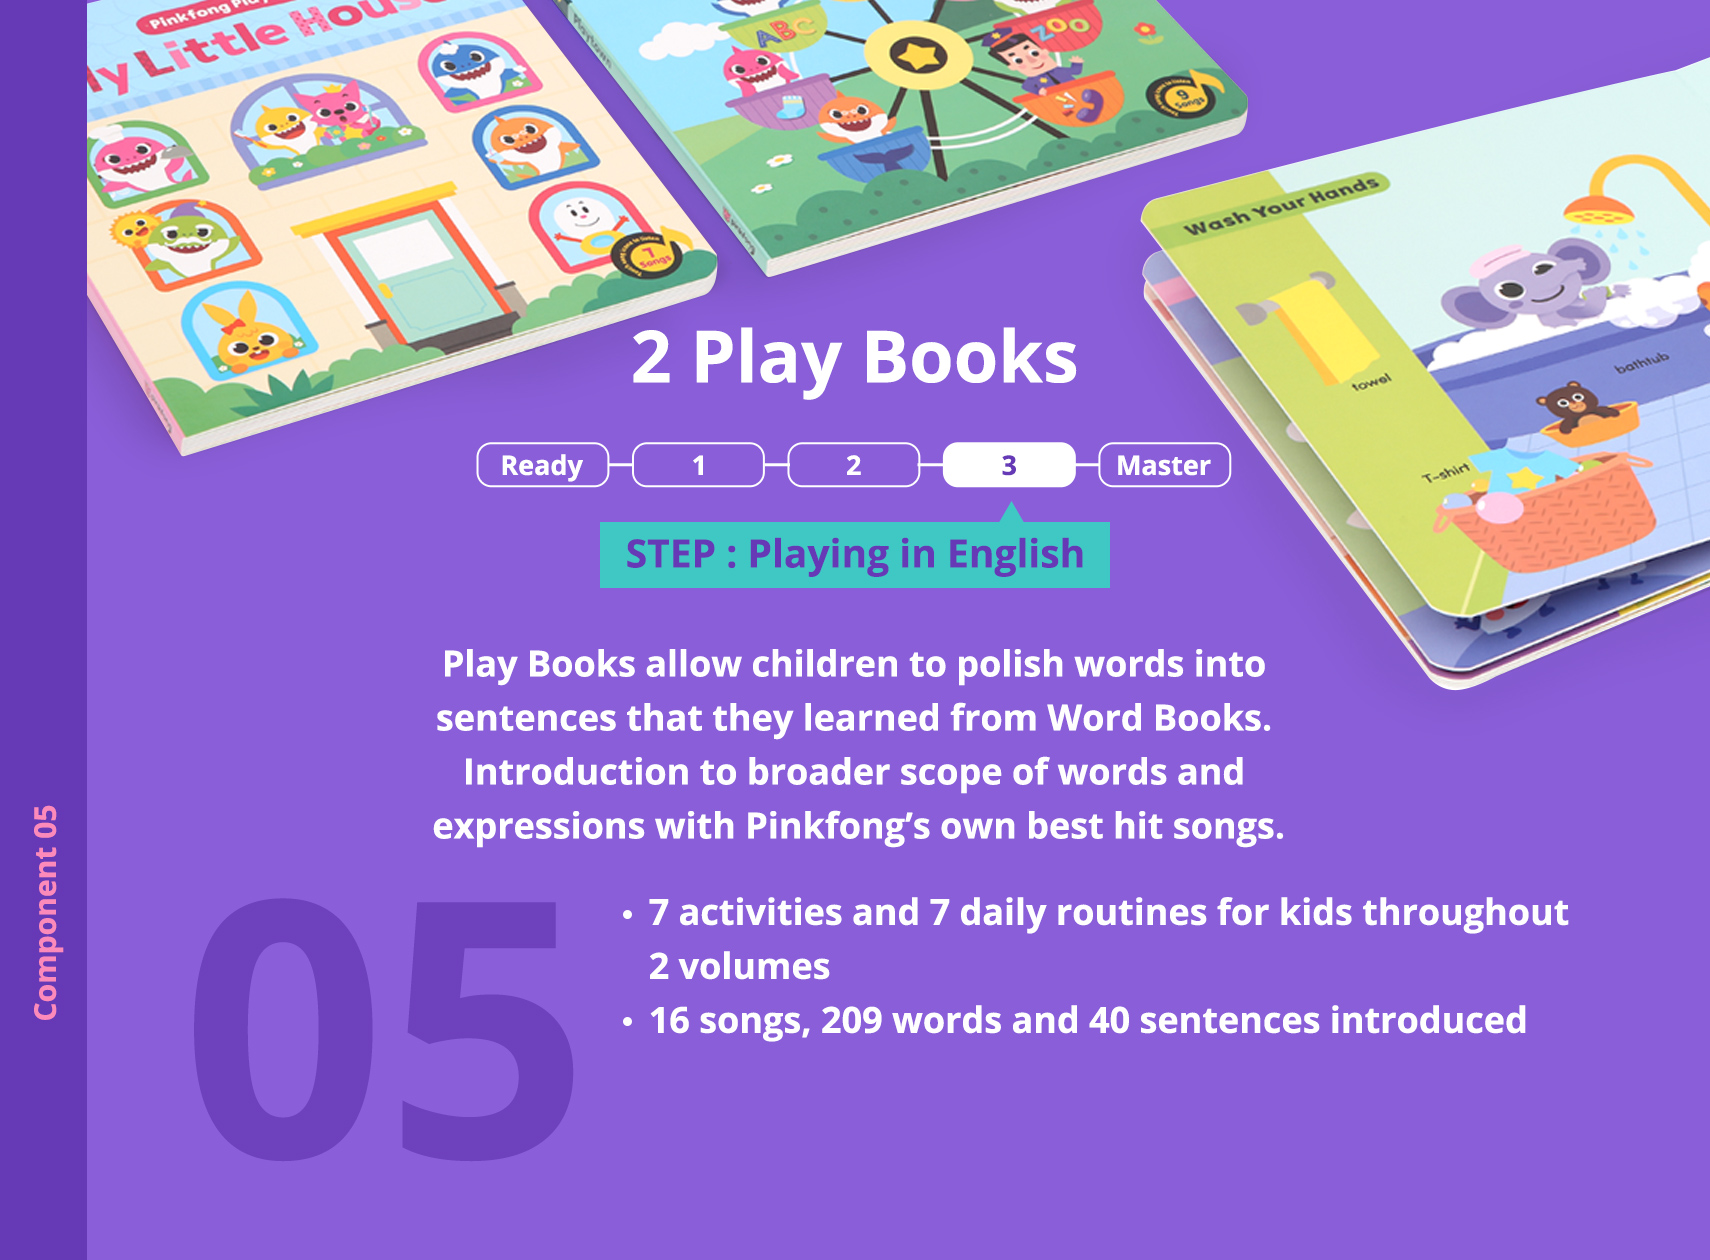 STEP : Playing in English. Play Books allow children to polish words into sentences that they learned from Word Books. Introduction to broader scope of words and expressions with Pinkfong’s own best hit songs.